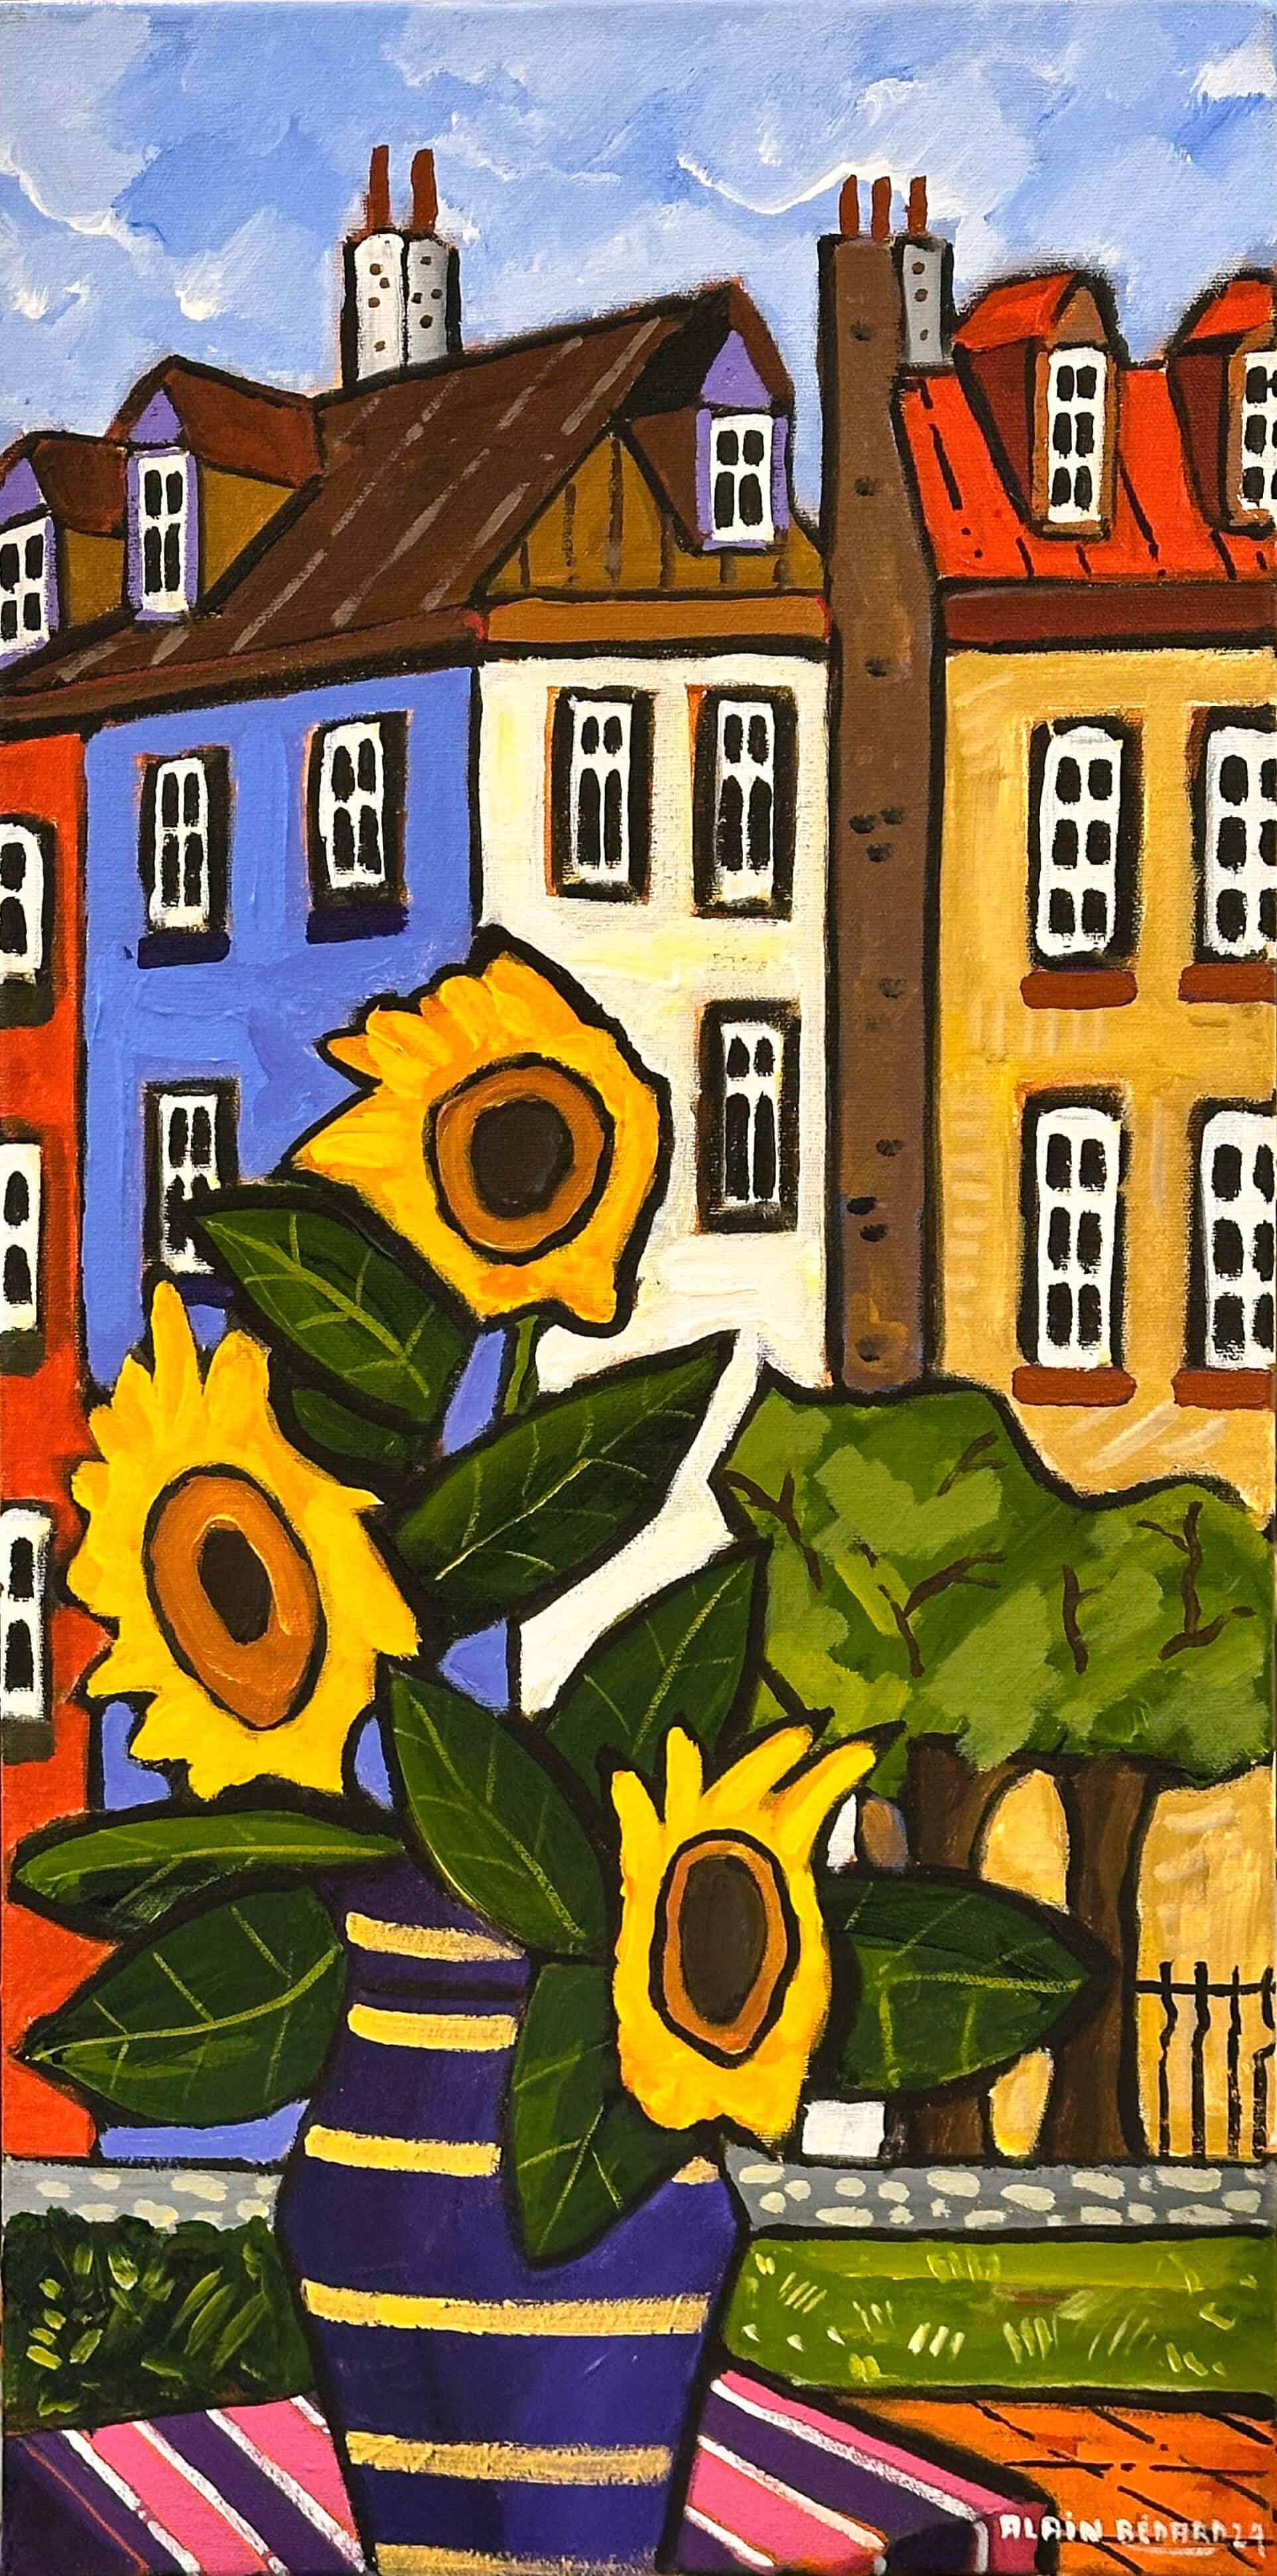 Contemporary Art. Title: Three Sunflowers, Acrylic on Canvas, 24 x 12 in by Canadian Artist Alain Bédard.